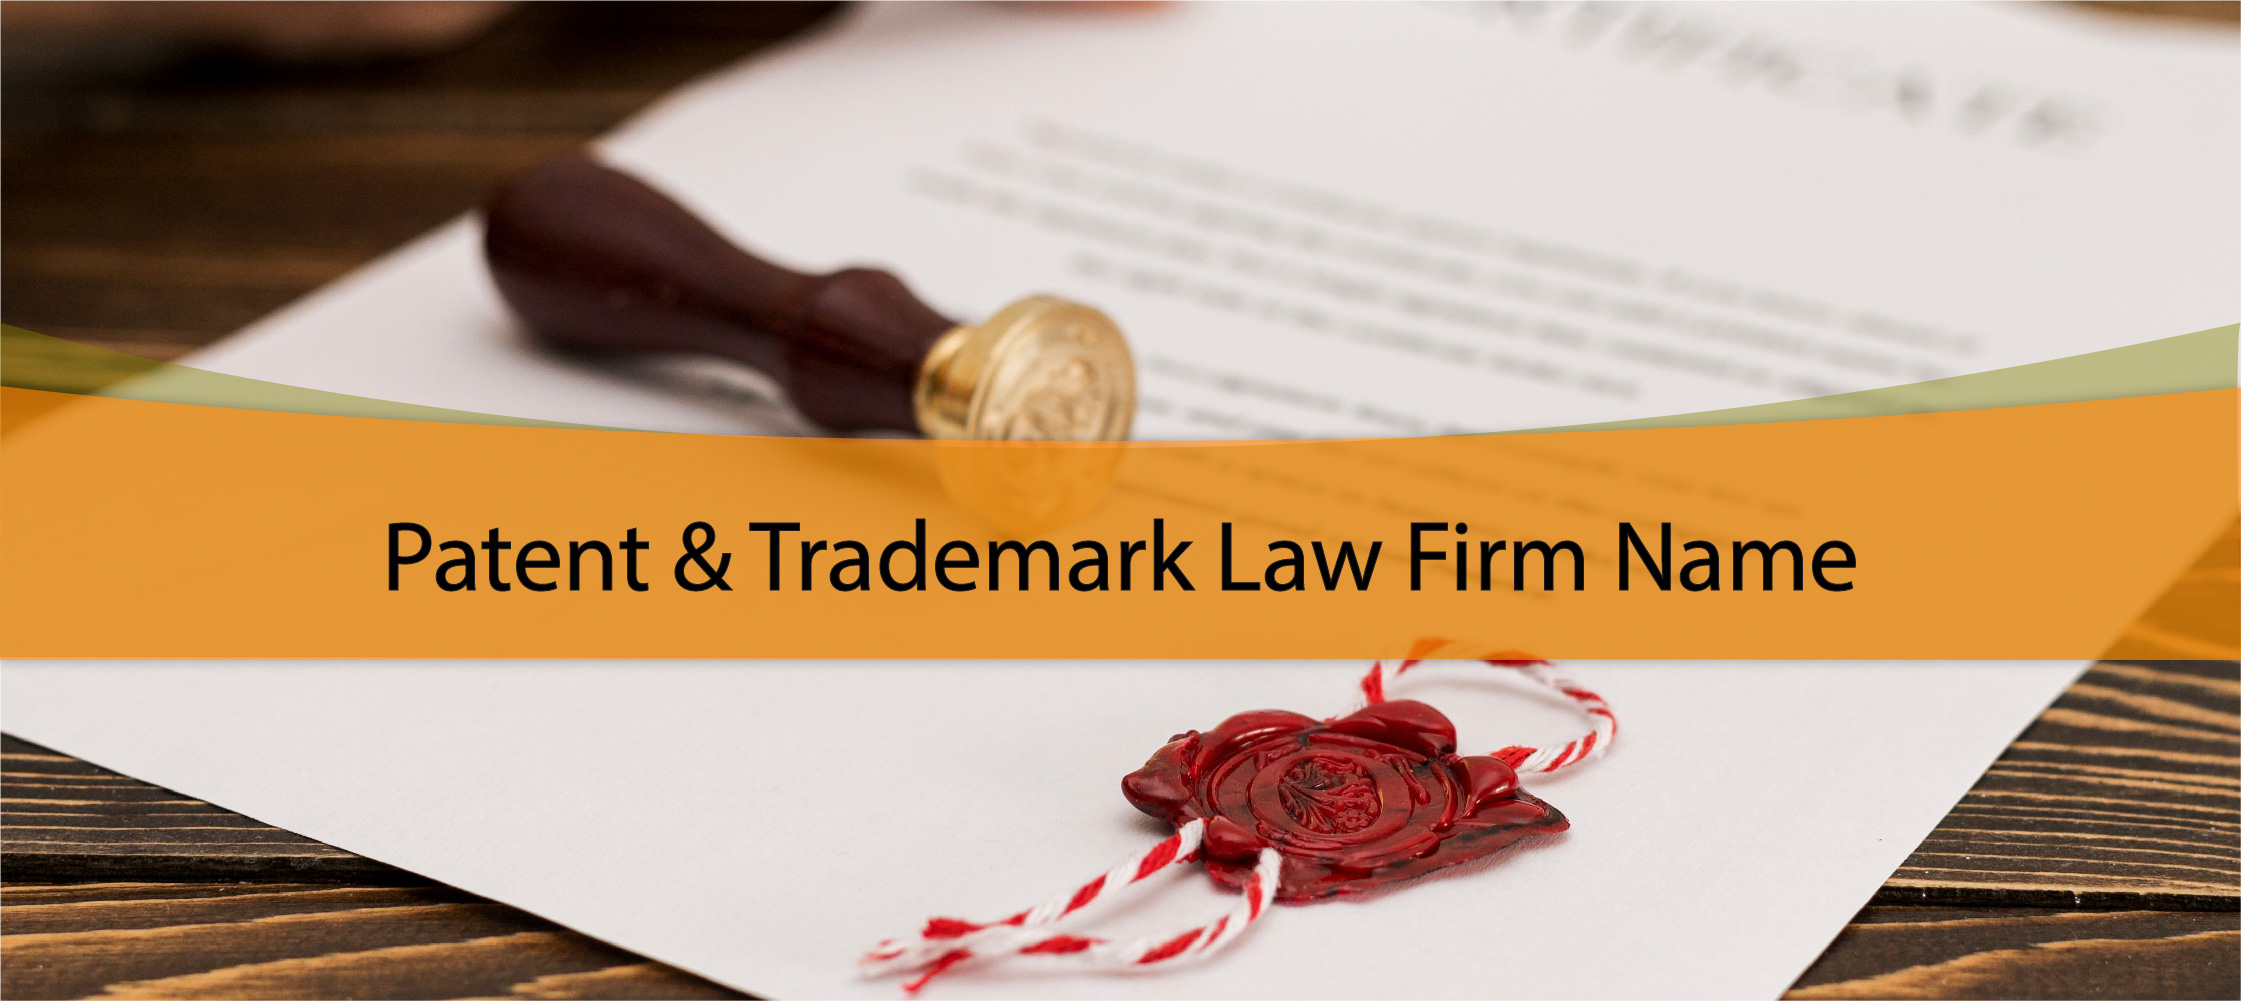 Patent & Trademark Law Firm Names